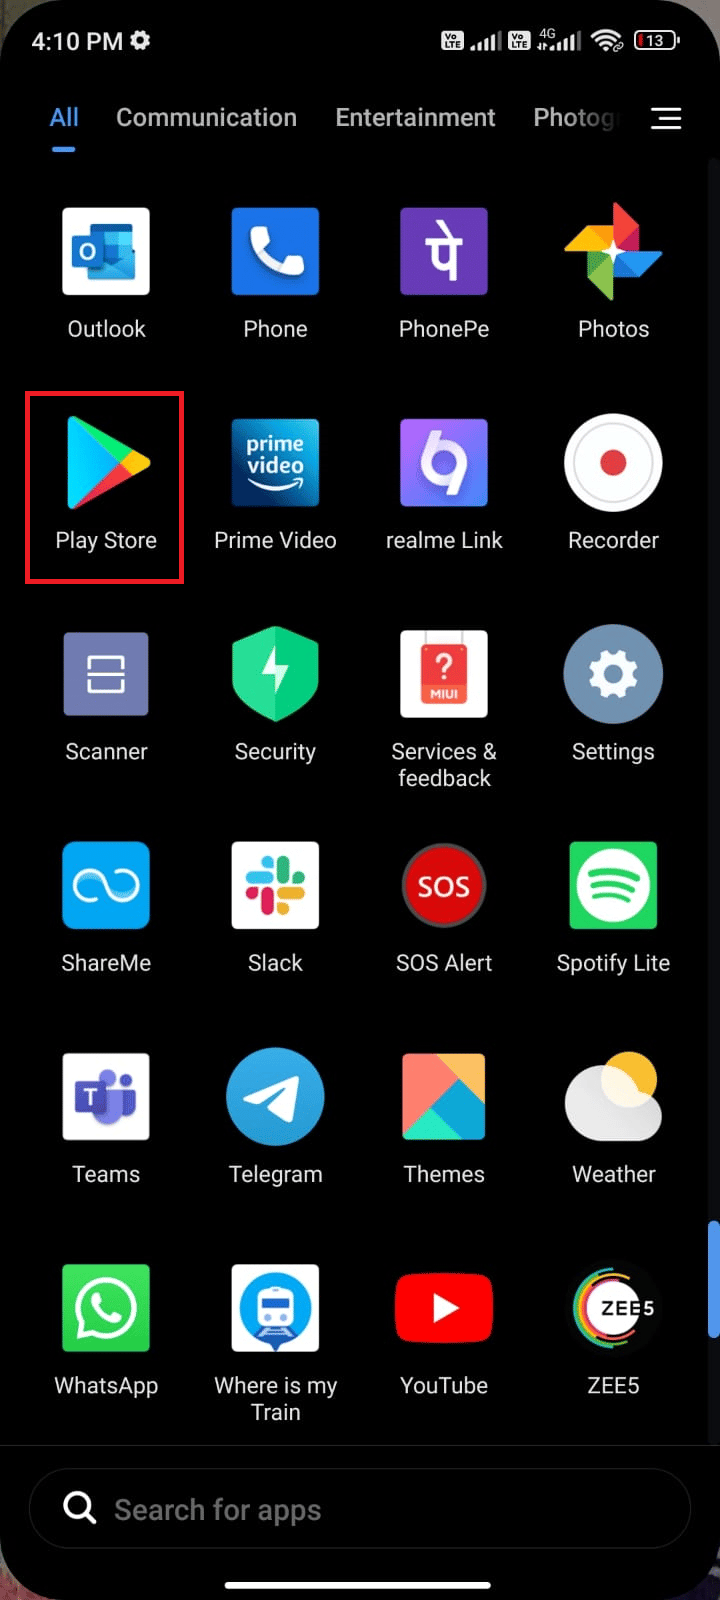 Go to your Home Screen and tap Play Store